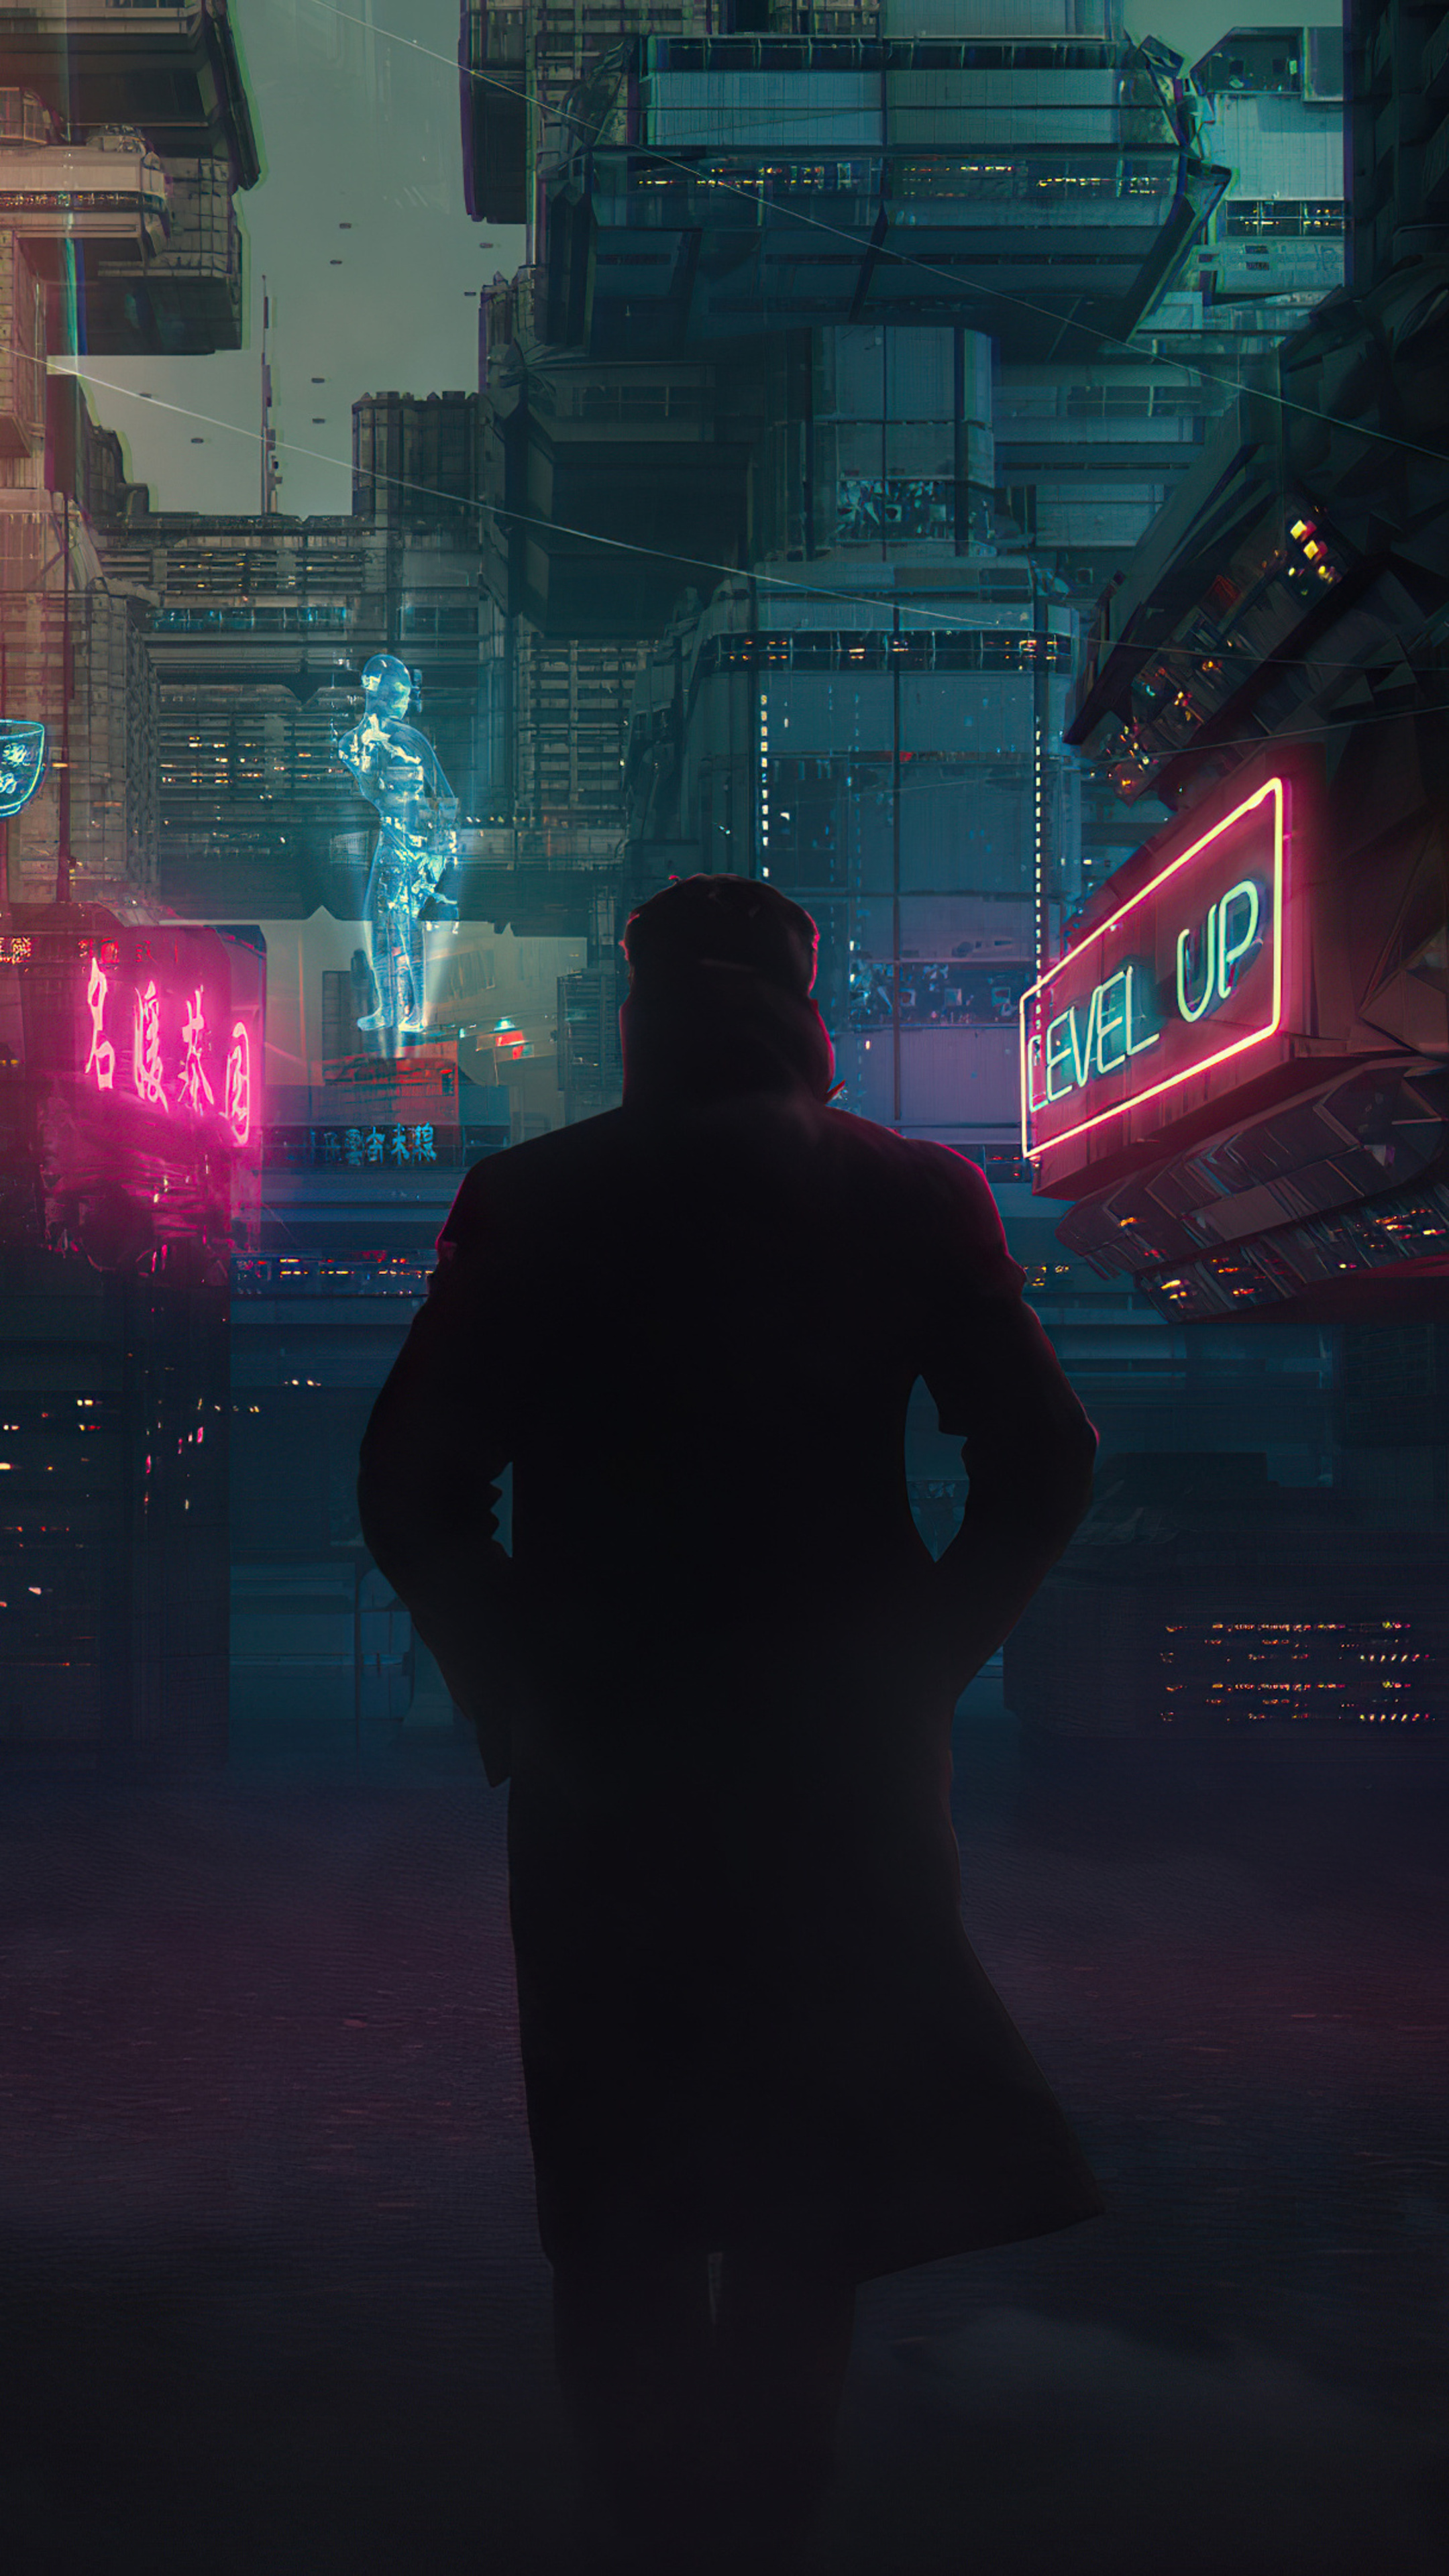 Blade Runner 2049 cyberpunk alley, 4K Sony Xperia wallpapers, HD images, 2160x3840 4K Handy